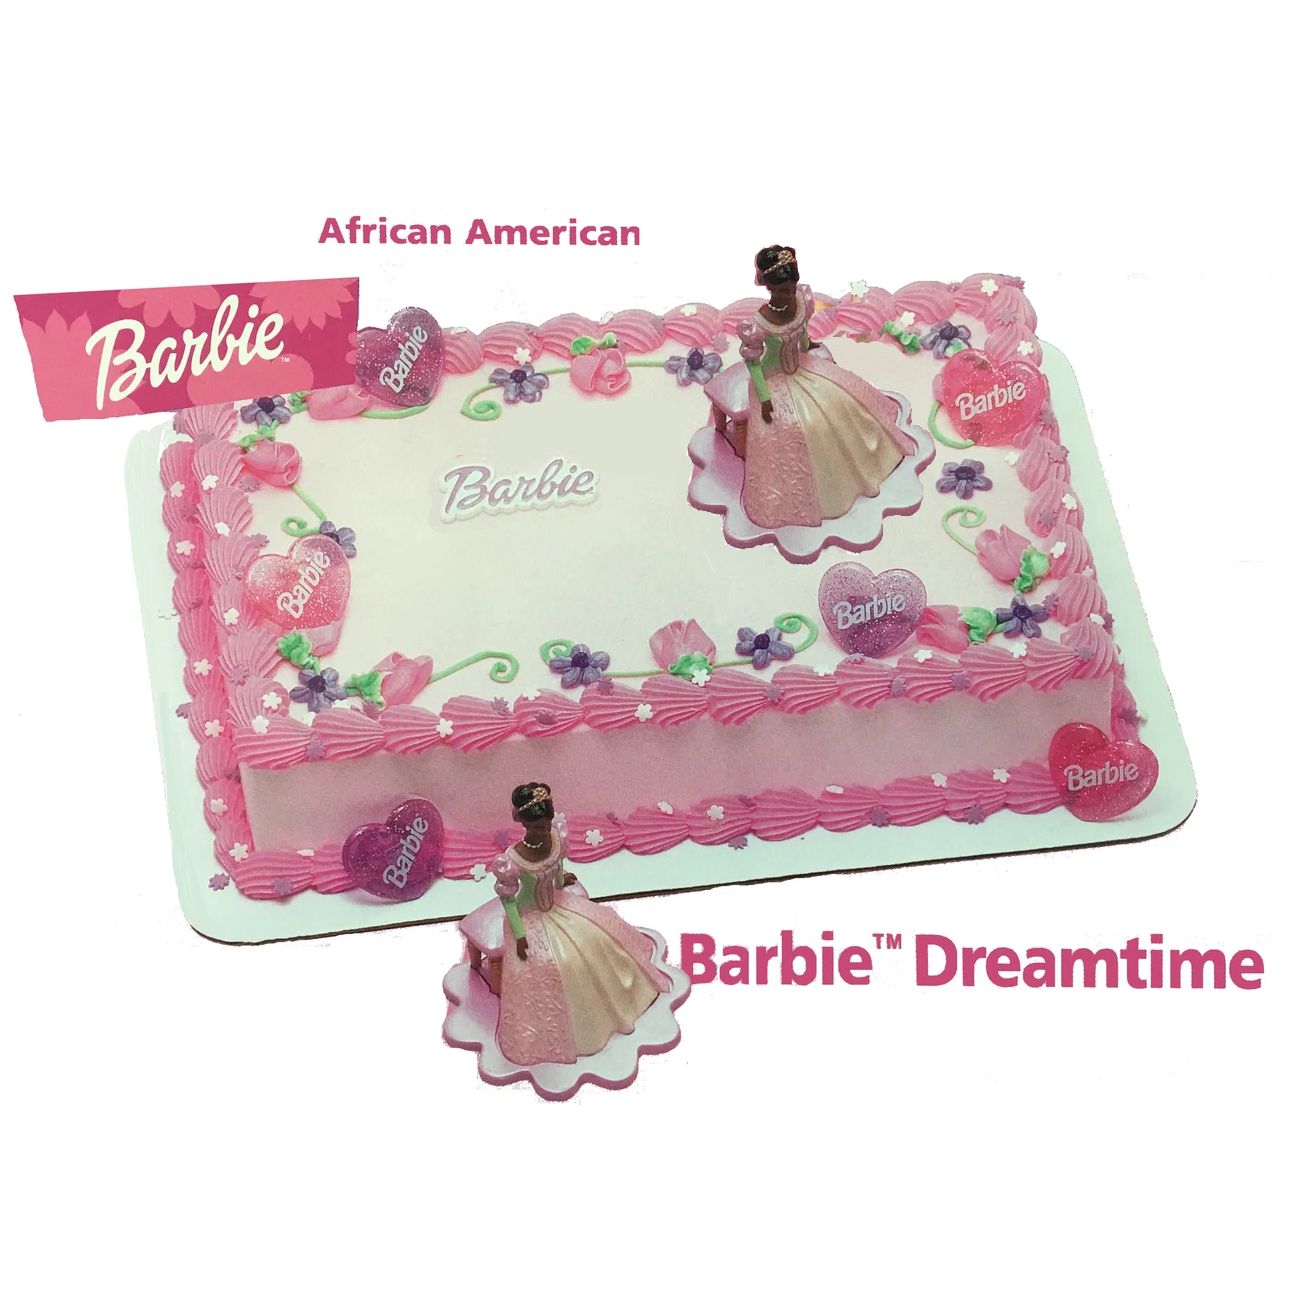 Ethnic African American Dreamtime Barbie Birthday Cake Party